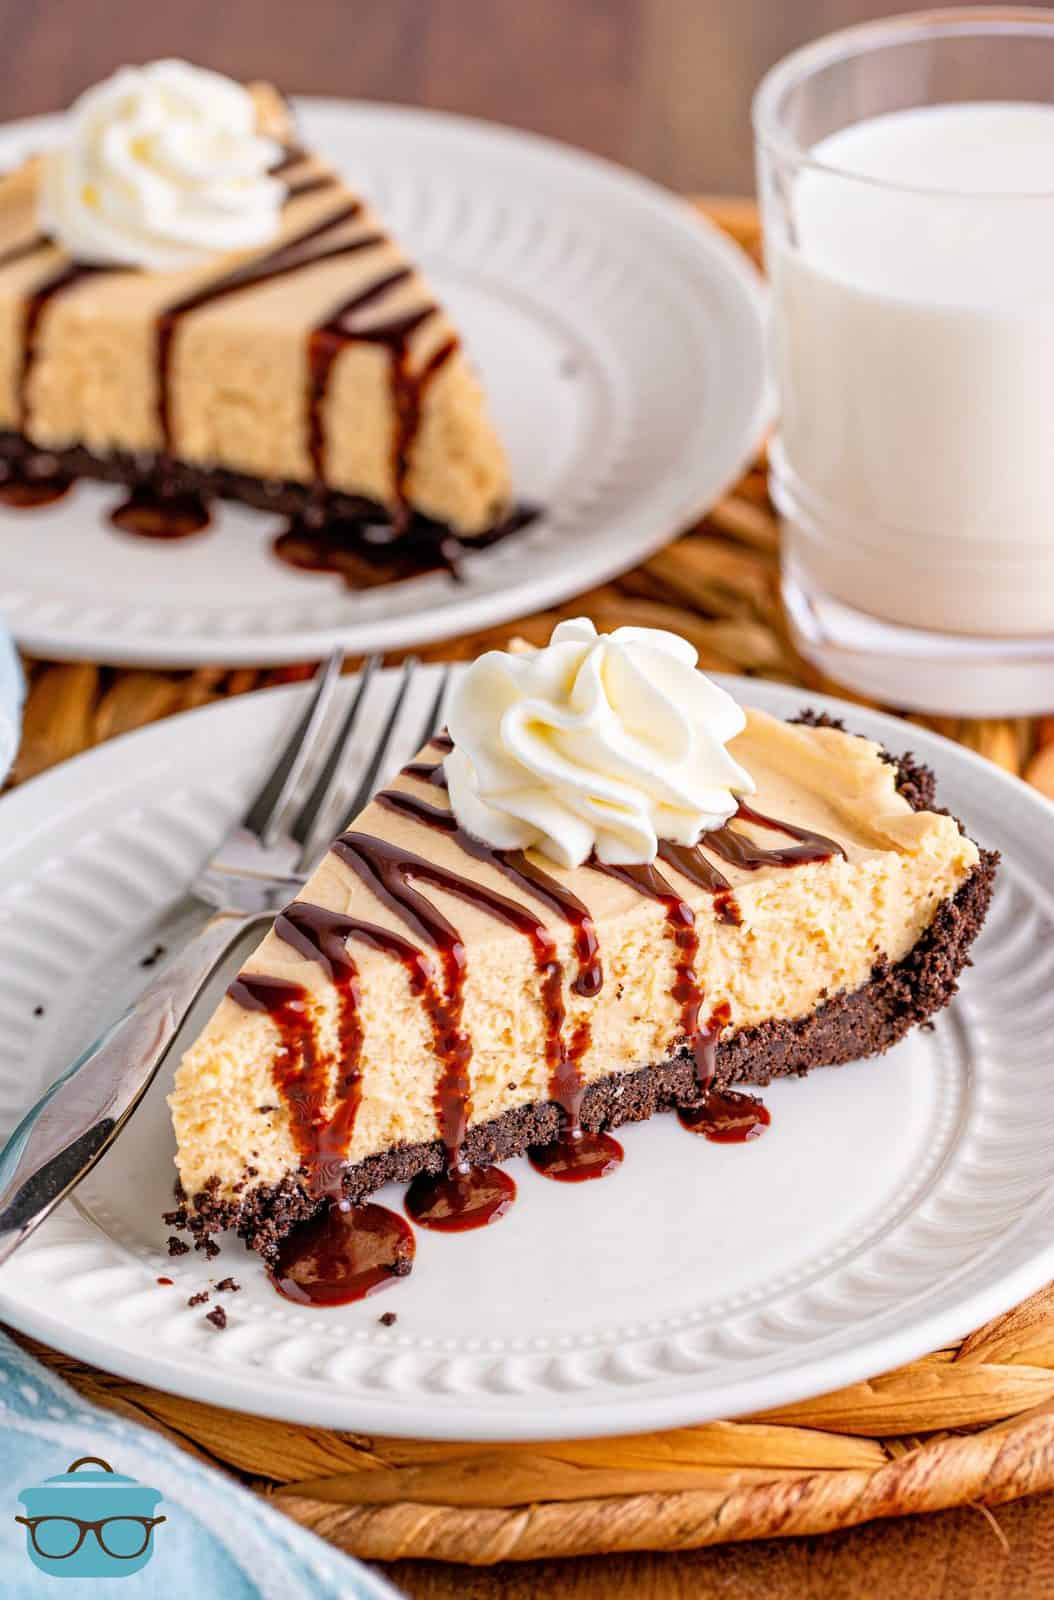 Slice of Peanut Butter Pie drizzled with chocolate and topped with whipped cream on white plate.